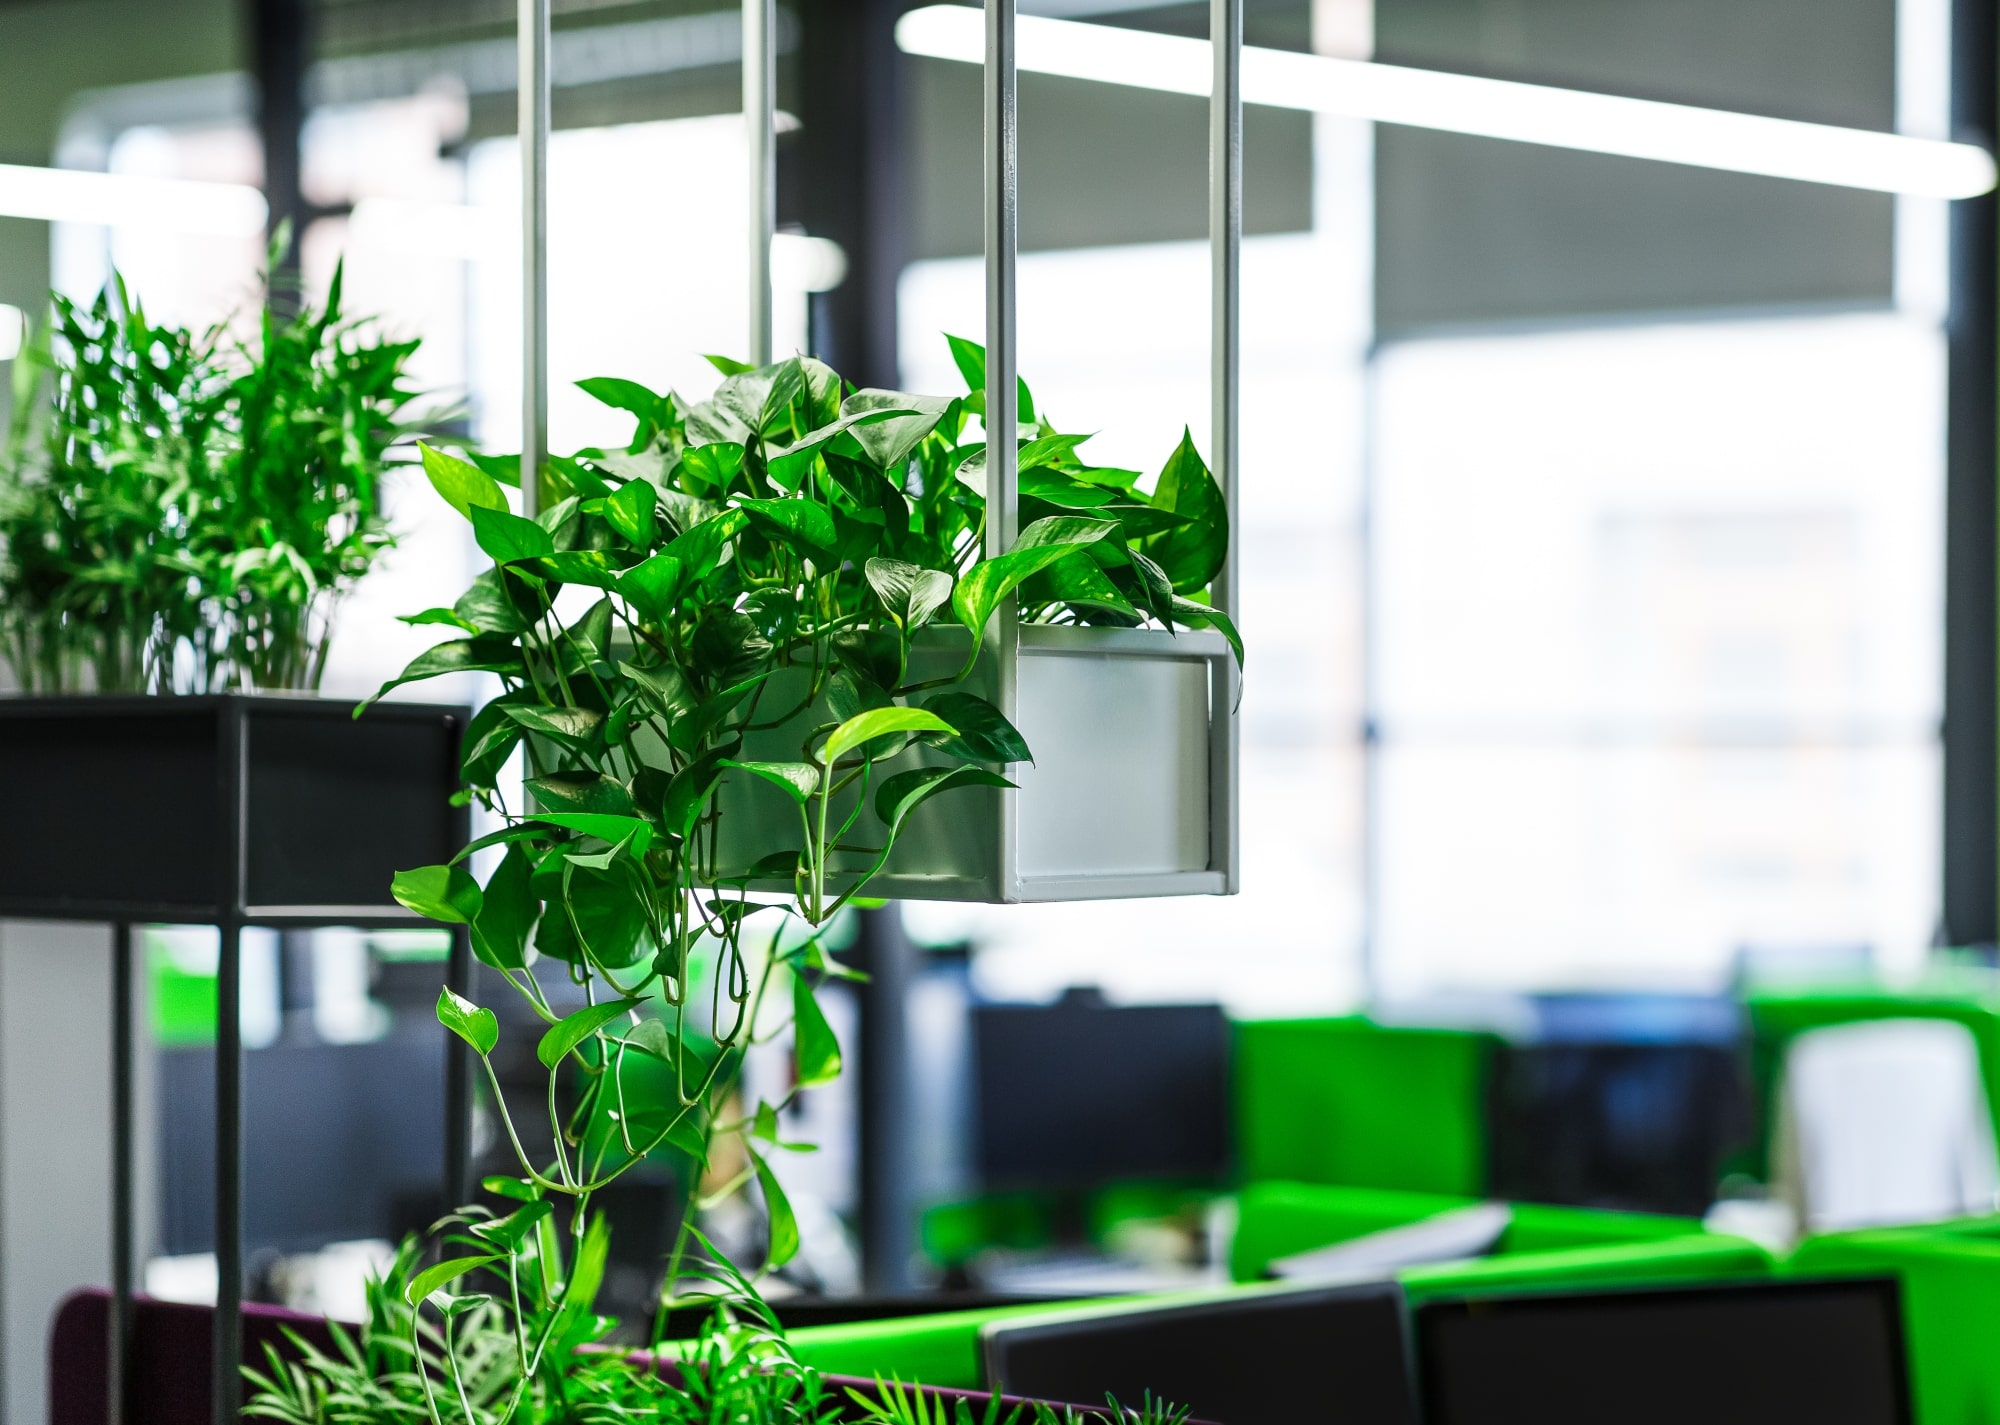 Bright green plants in an office with natural lighting.